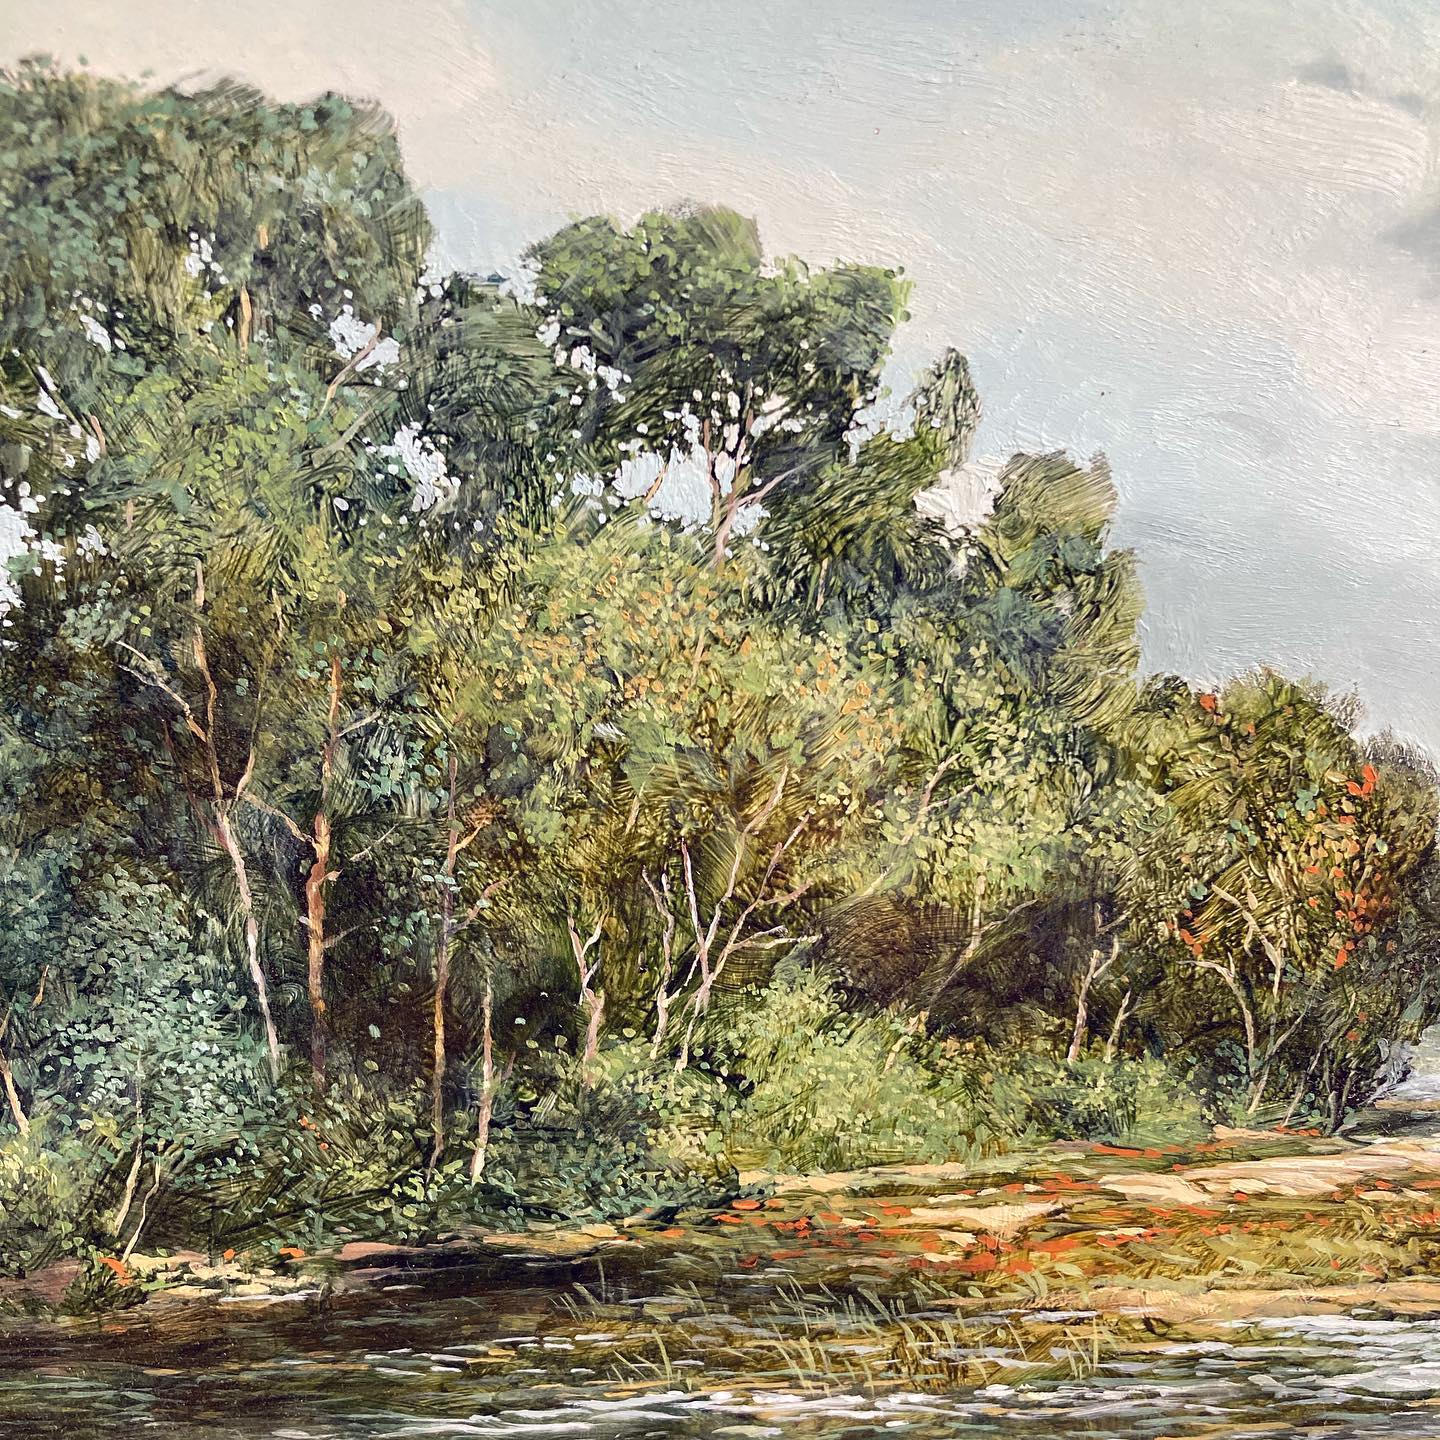 Oil painting on board, “High Water Blackstone River” by Teri Malo